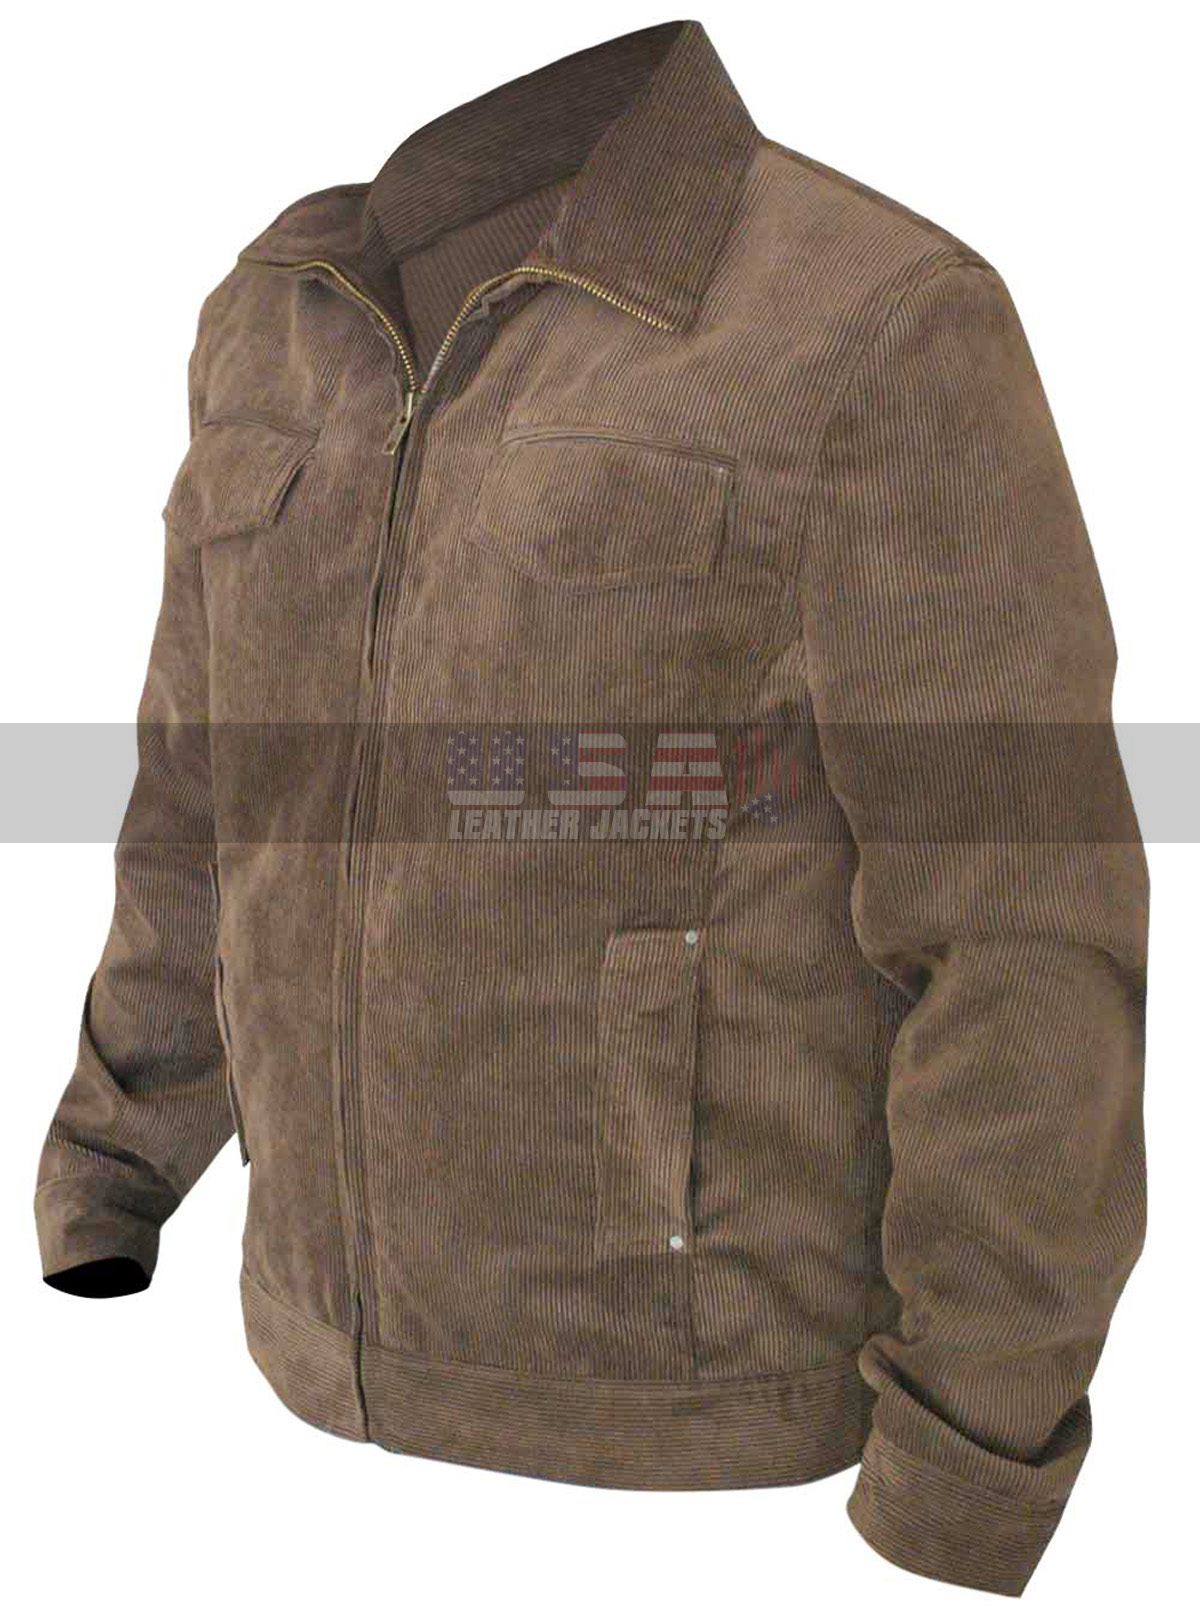 Harry Potter and Deathly Hallows 2 Brown Corduroy Jacket